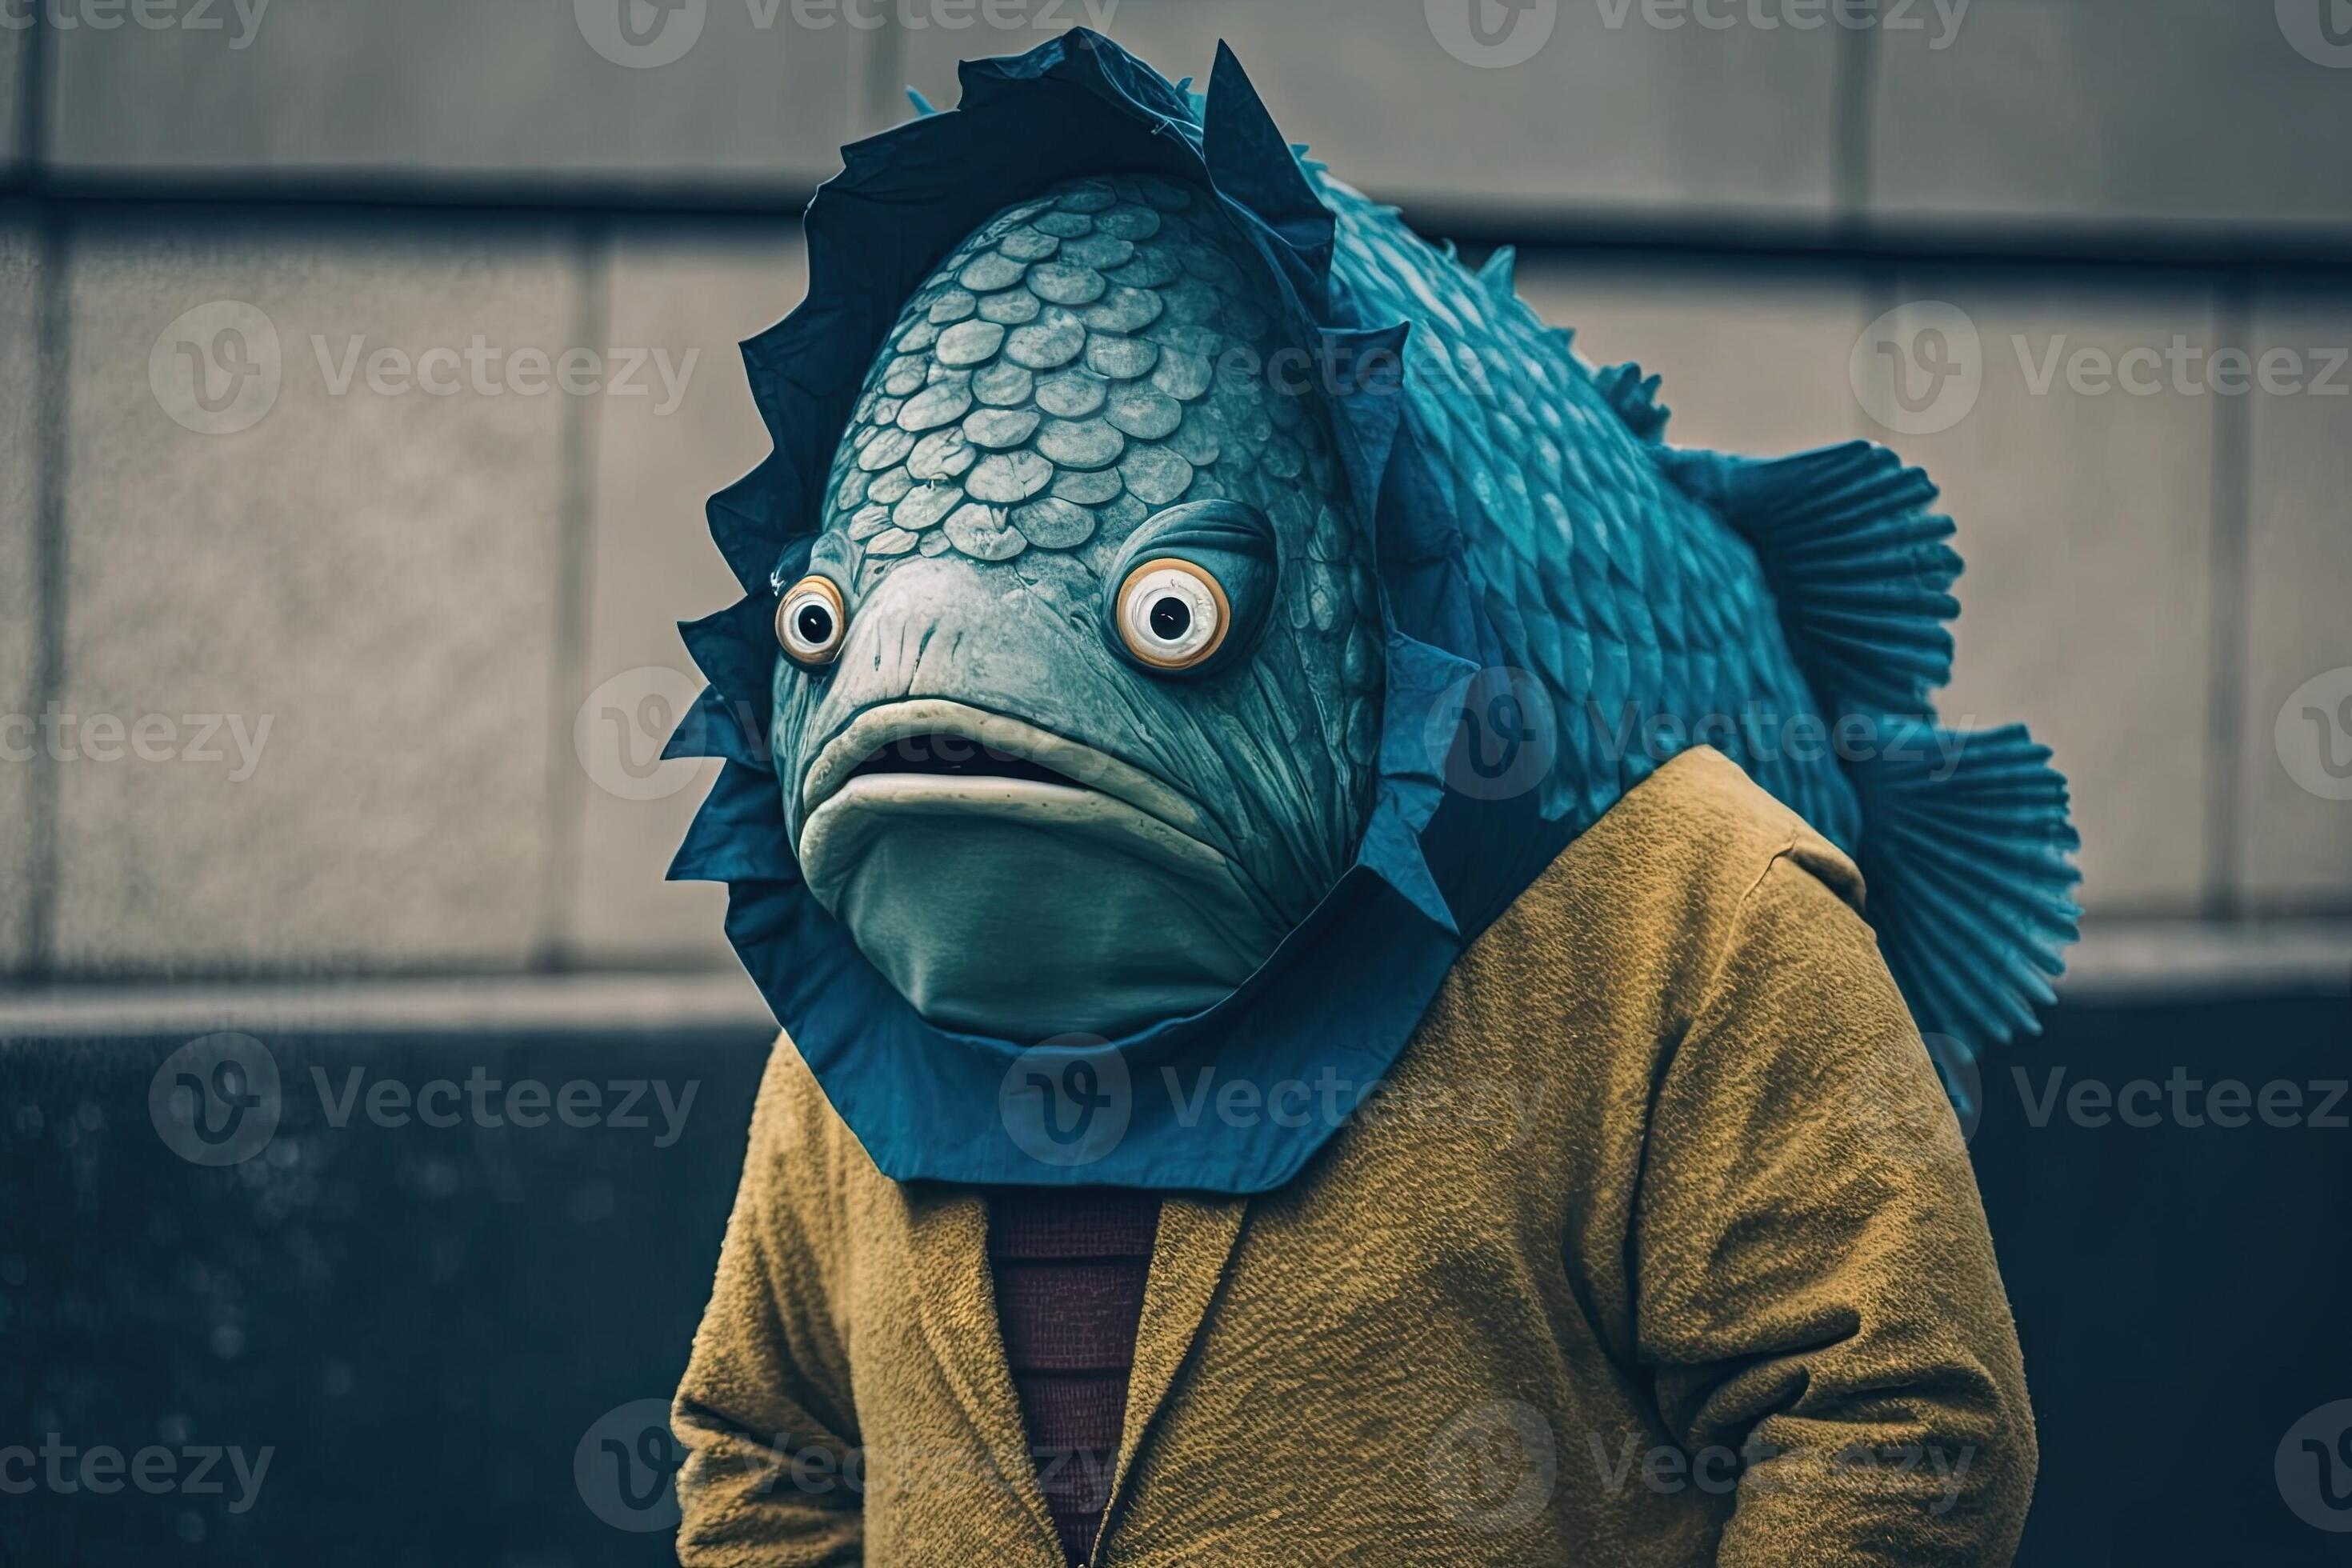 Man disguised with a fish costume for the april fool's day joke